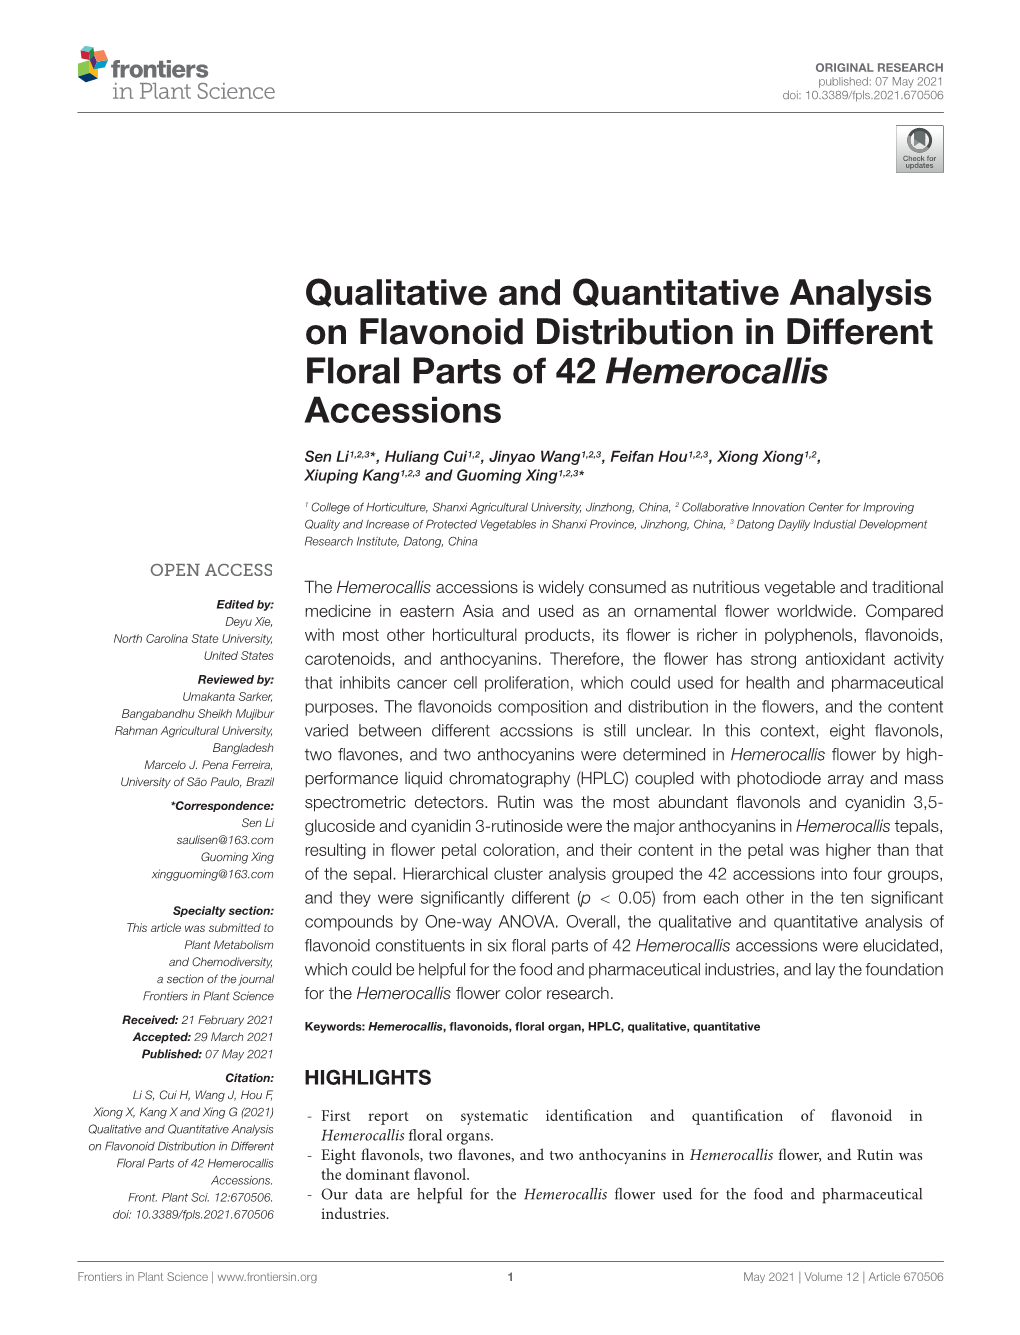 Qualitative and Quantitative Analysis on Flavonoid Distribution in Different Floral Parts of 42 Hemerocallis Accessions